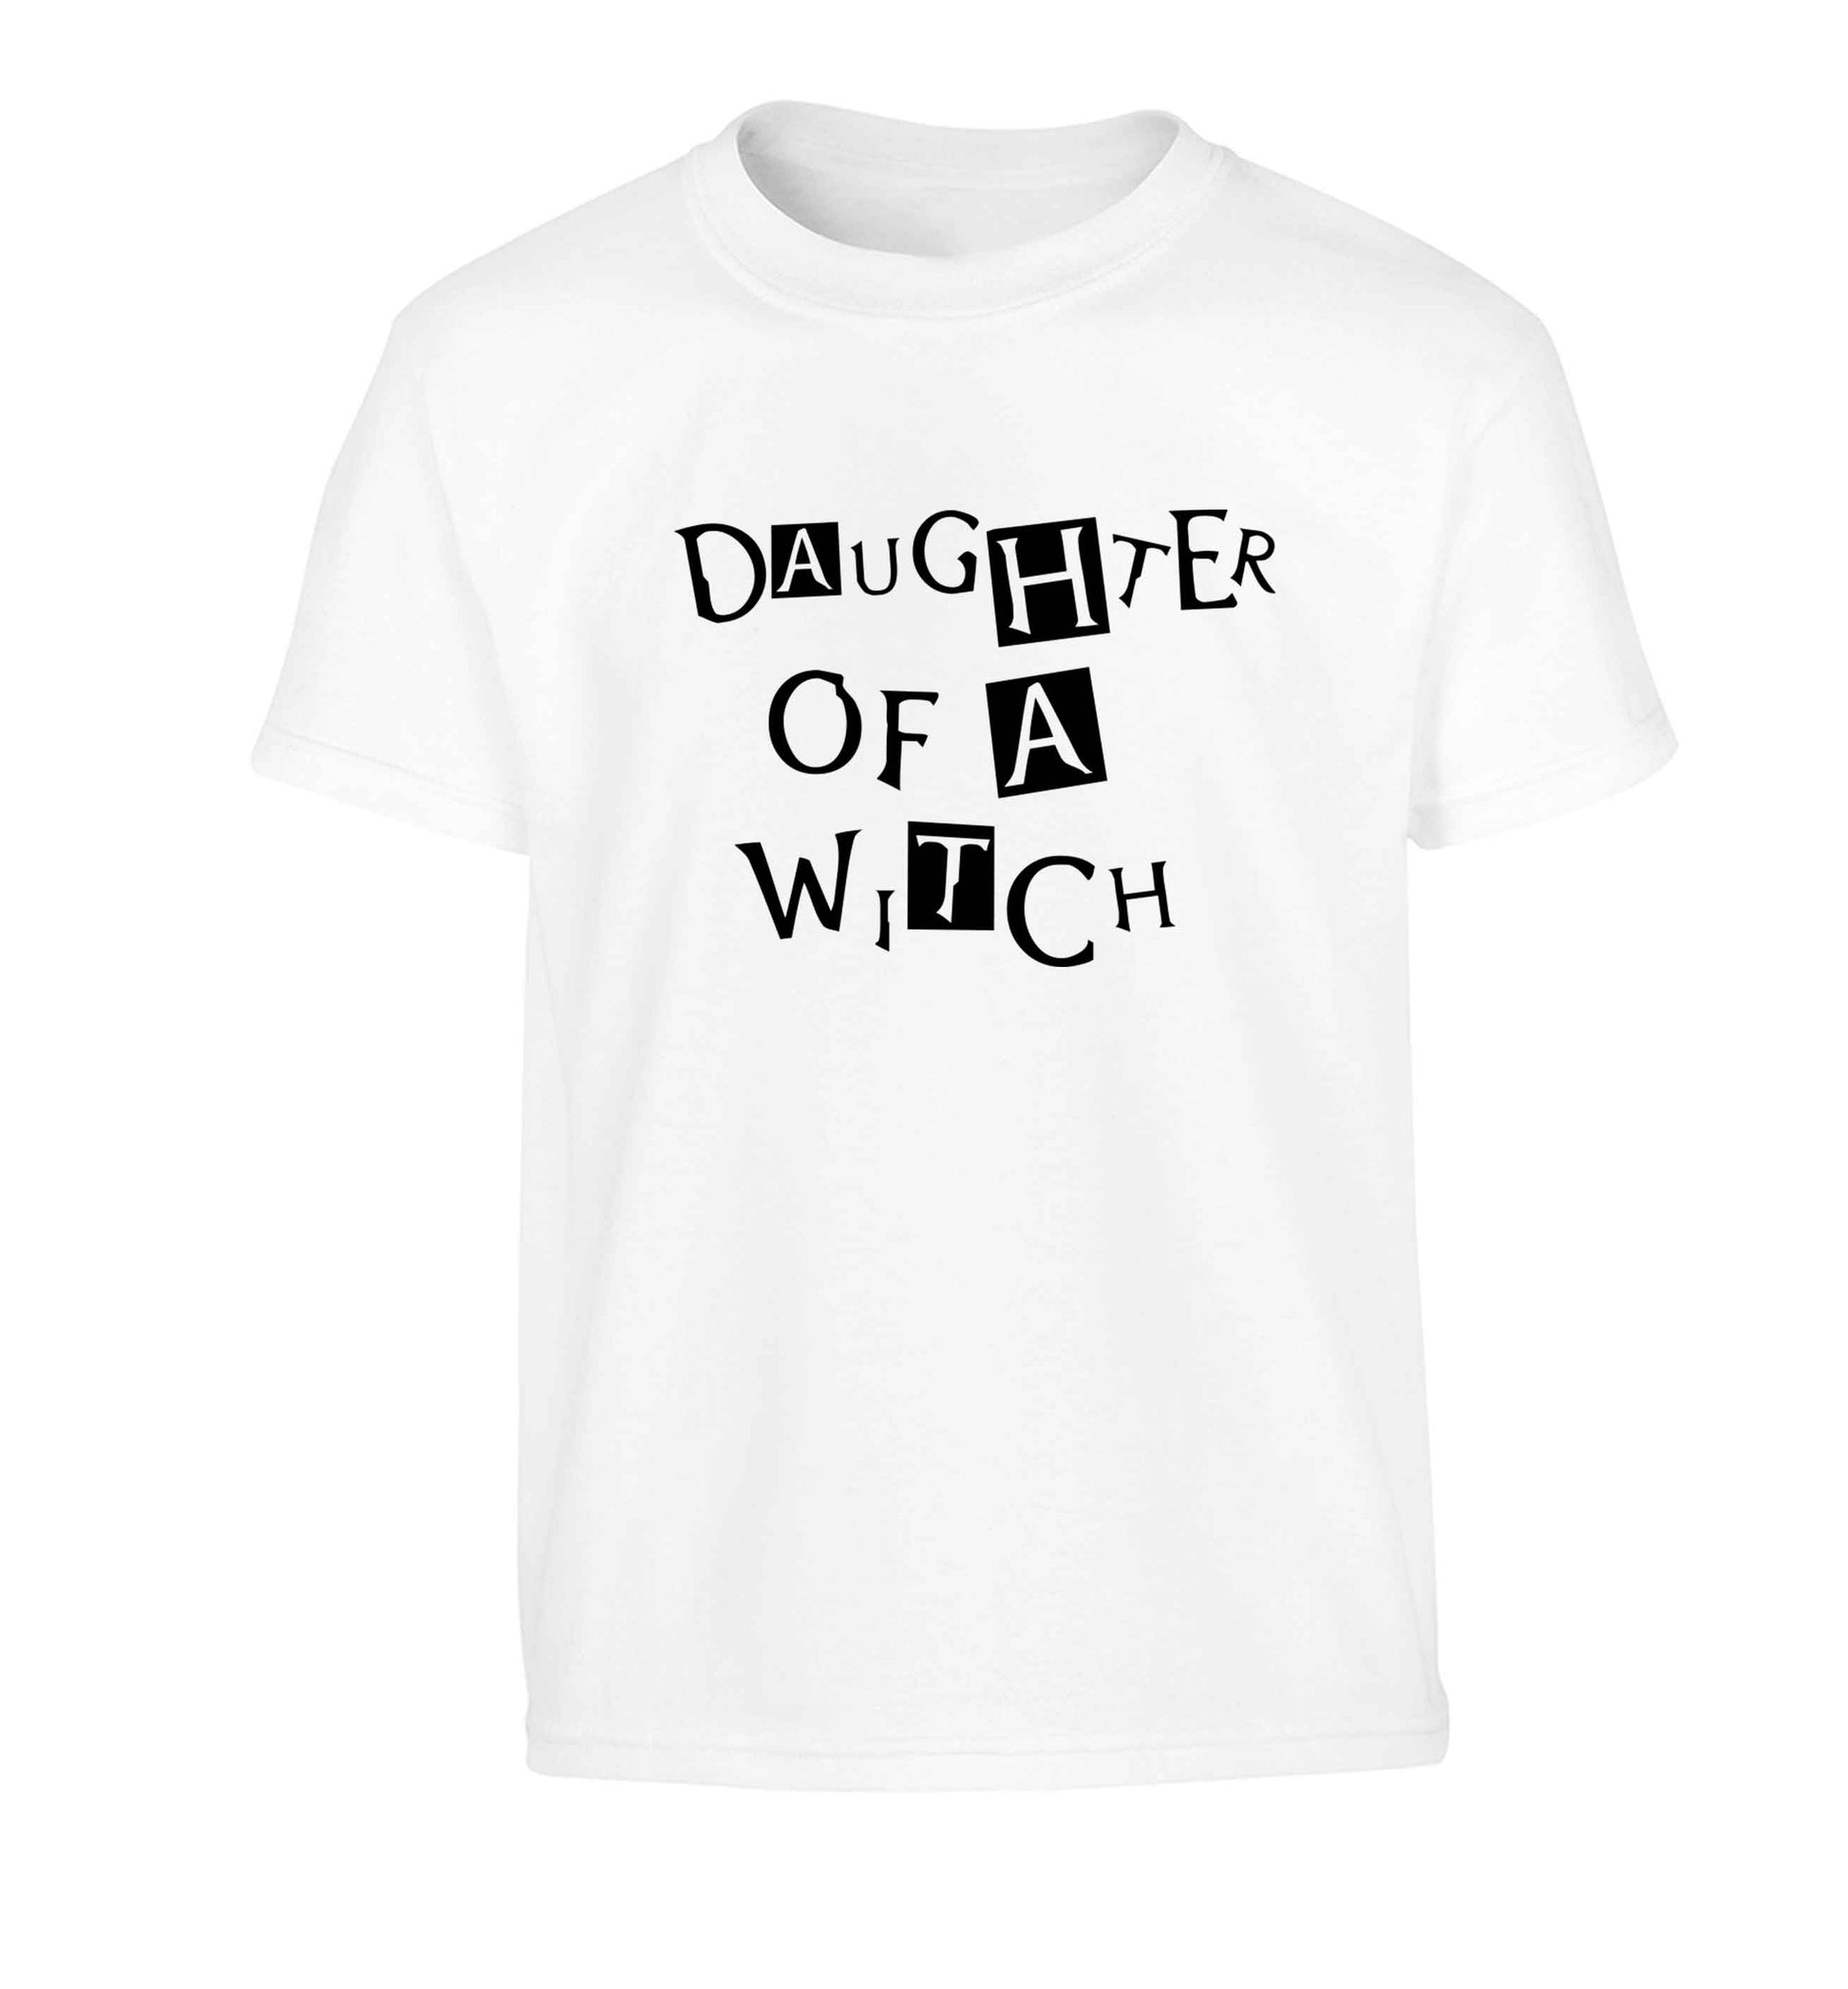 Daughter of a witch Children's white Tshirt 12-13 Years